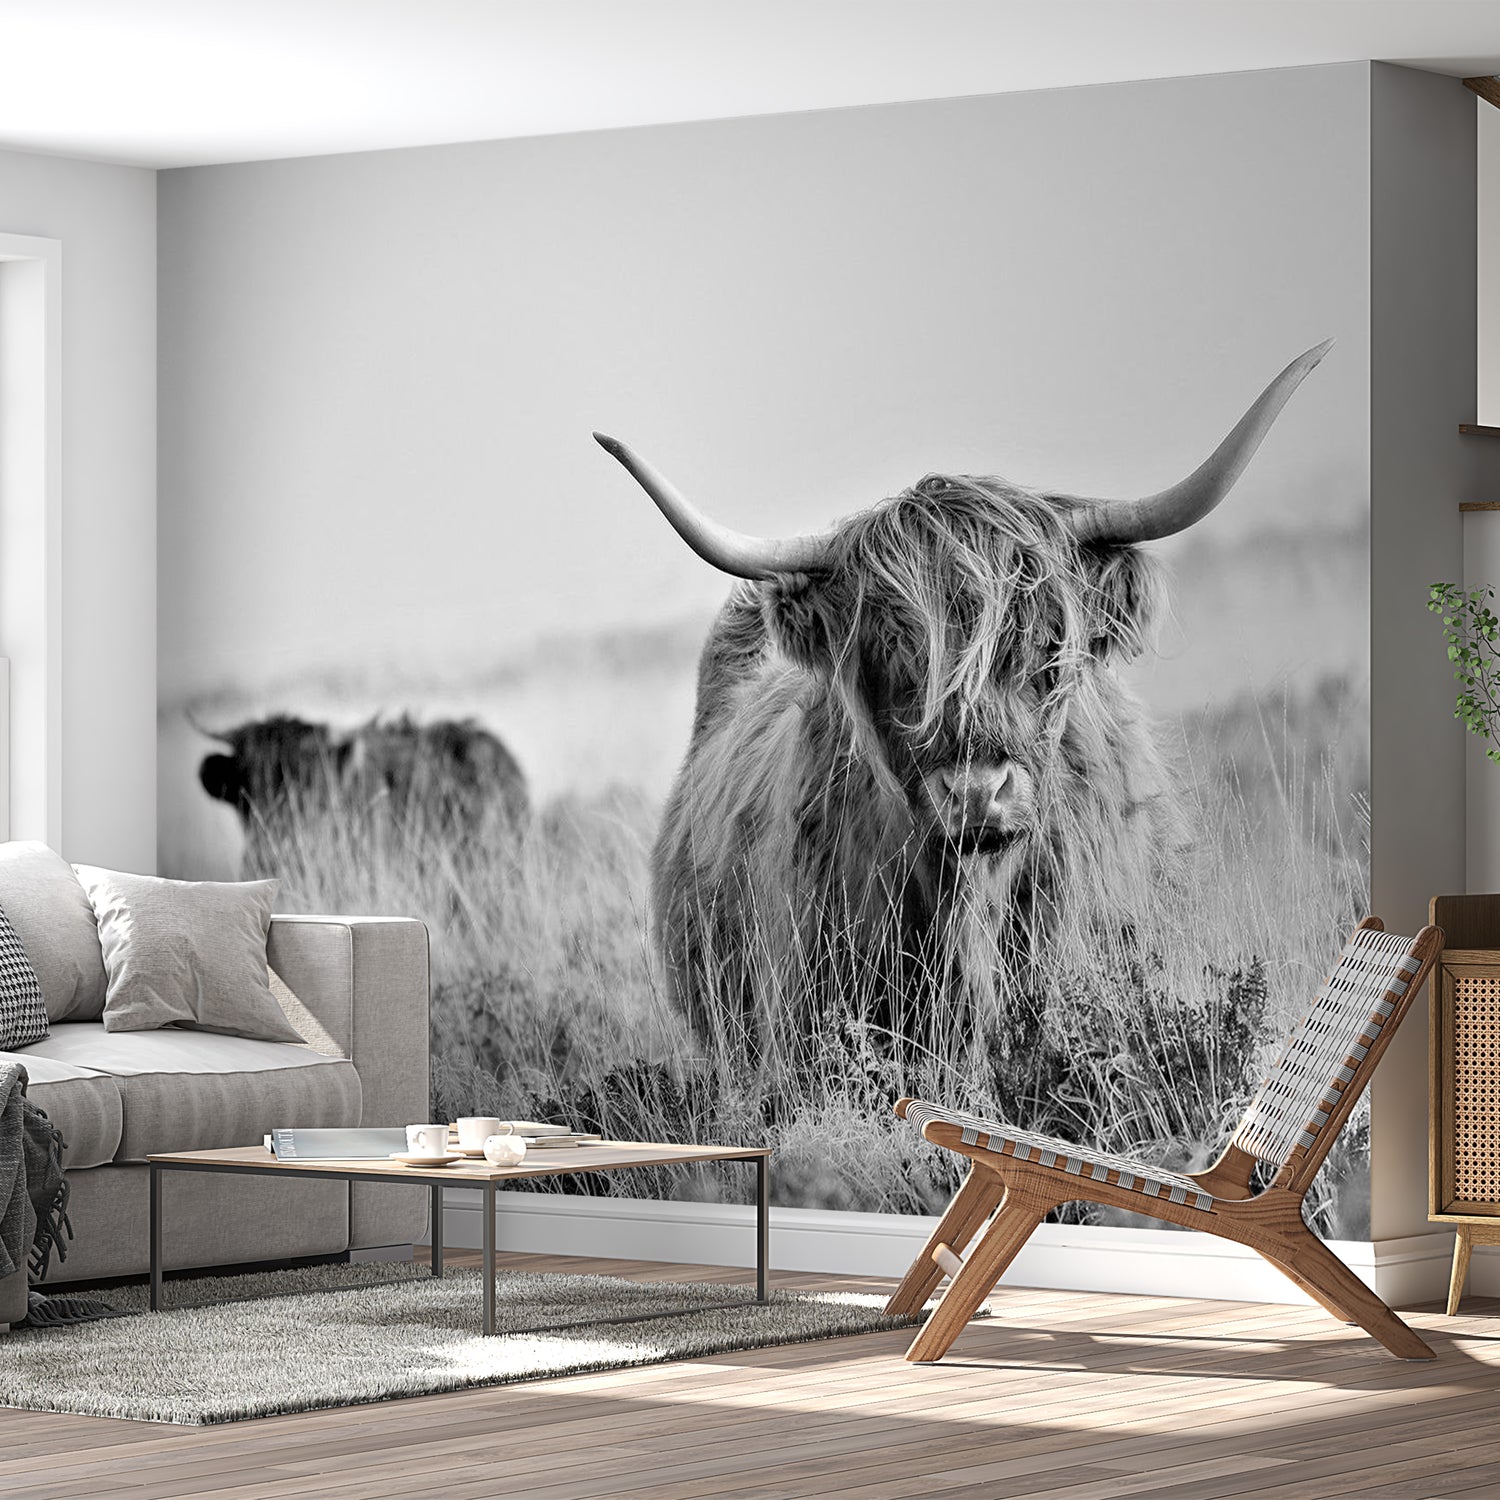 Peel & Stick Animal Wall Mural - Highland Cow - Removable Wall Decals